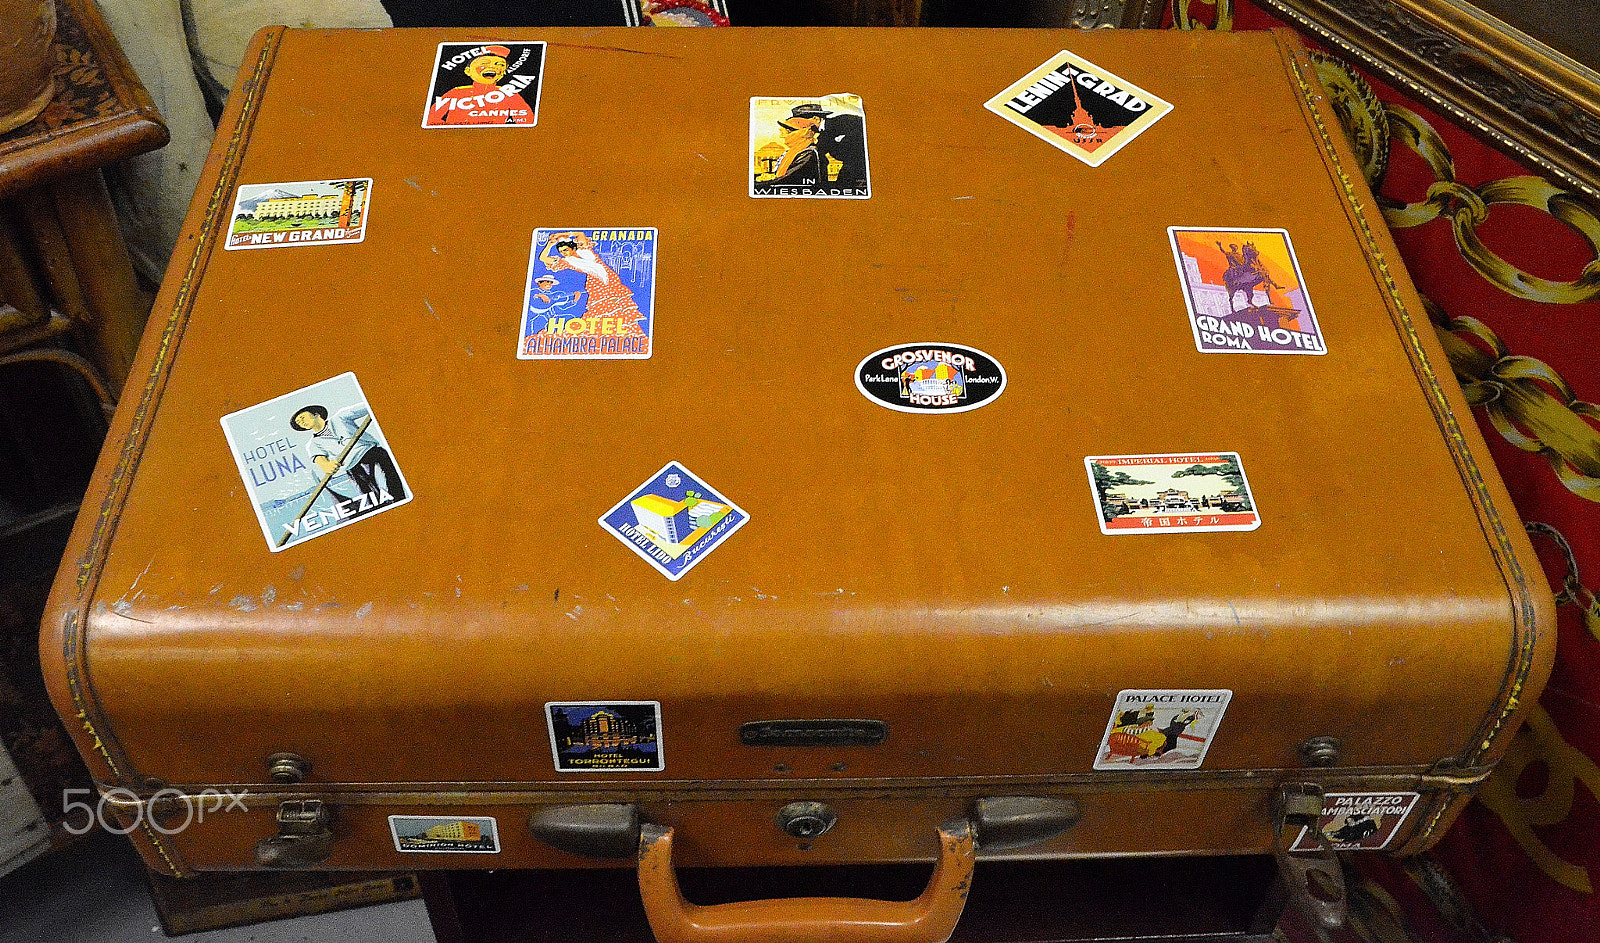 Nikon D5100 sample photo. The well-traveled suitcase photography